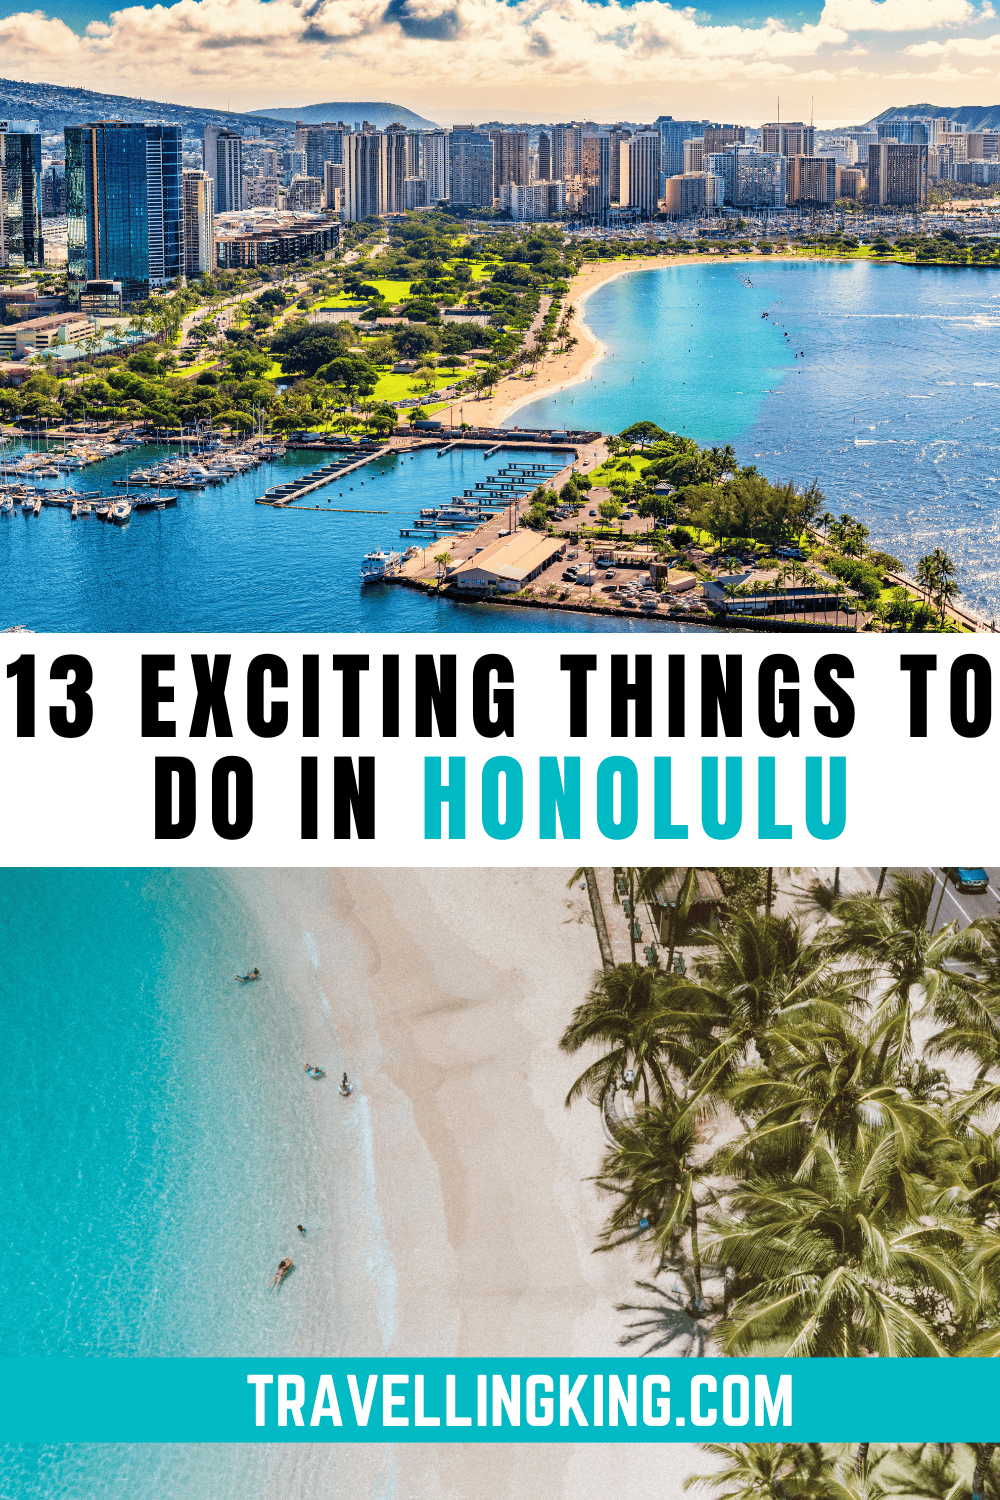 TOP 13 Exciting Things to do in Honolulu Hawaii